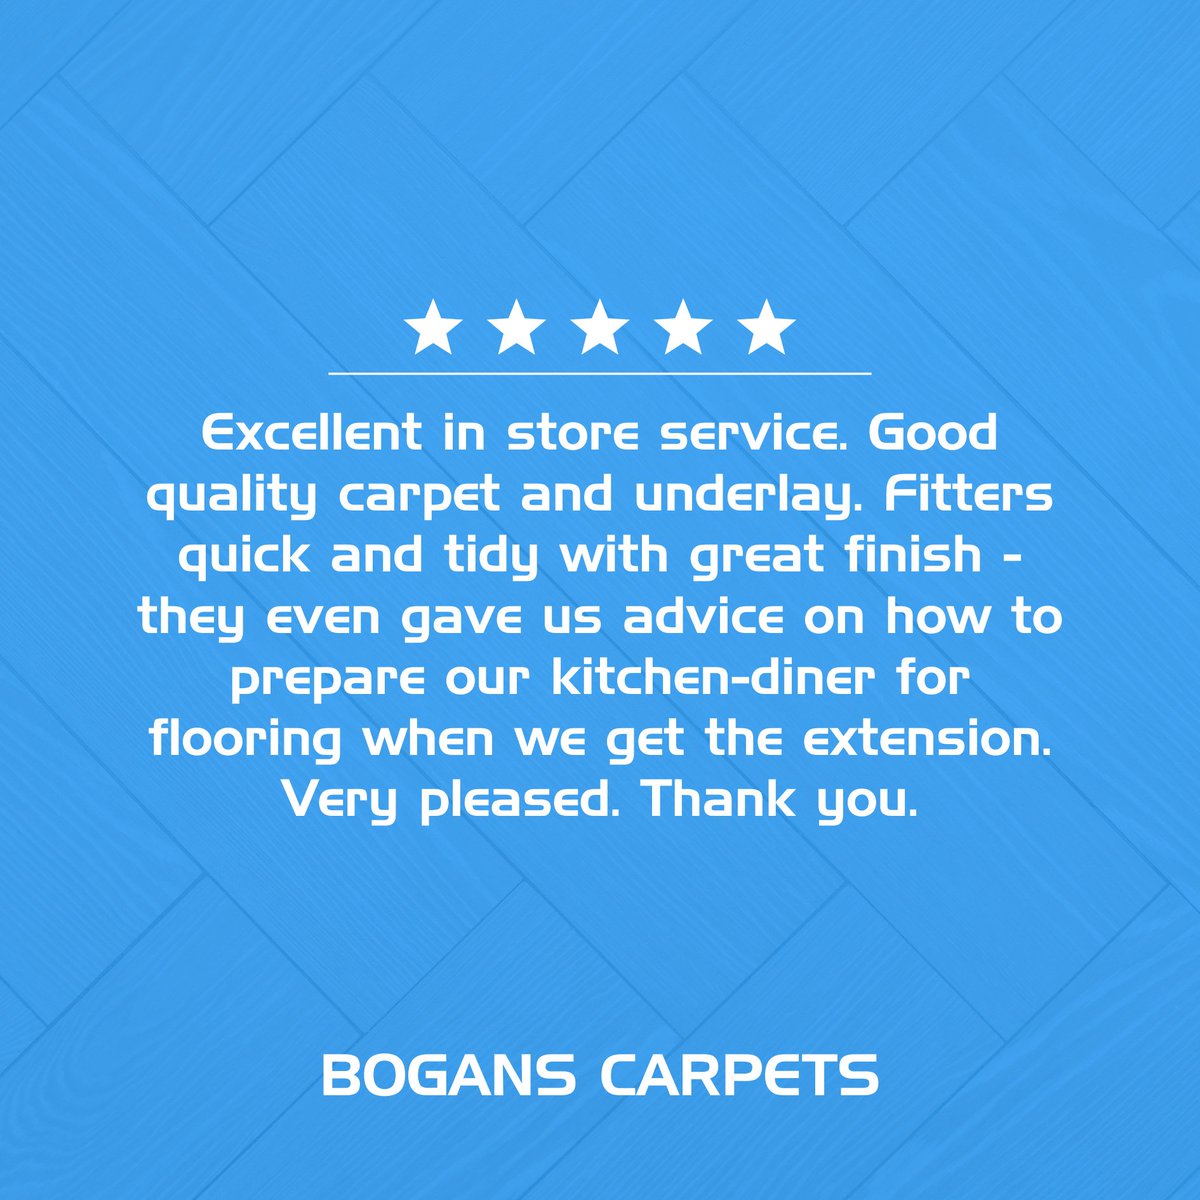 Nothing beats great feedback from our customers 😍

Don't forget to leave us a review on Google or Facebook
.
.
.
#review #dreamflooring #happycustomer #flooring #interior #homerenovation #flooringexperts #housetohome #carpetgoals #newcarpet #interiorinspo